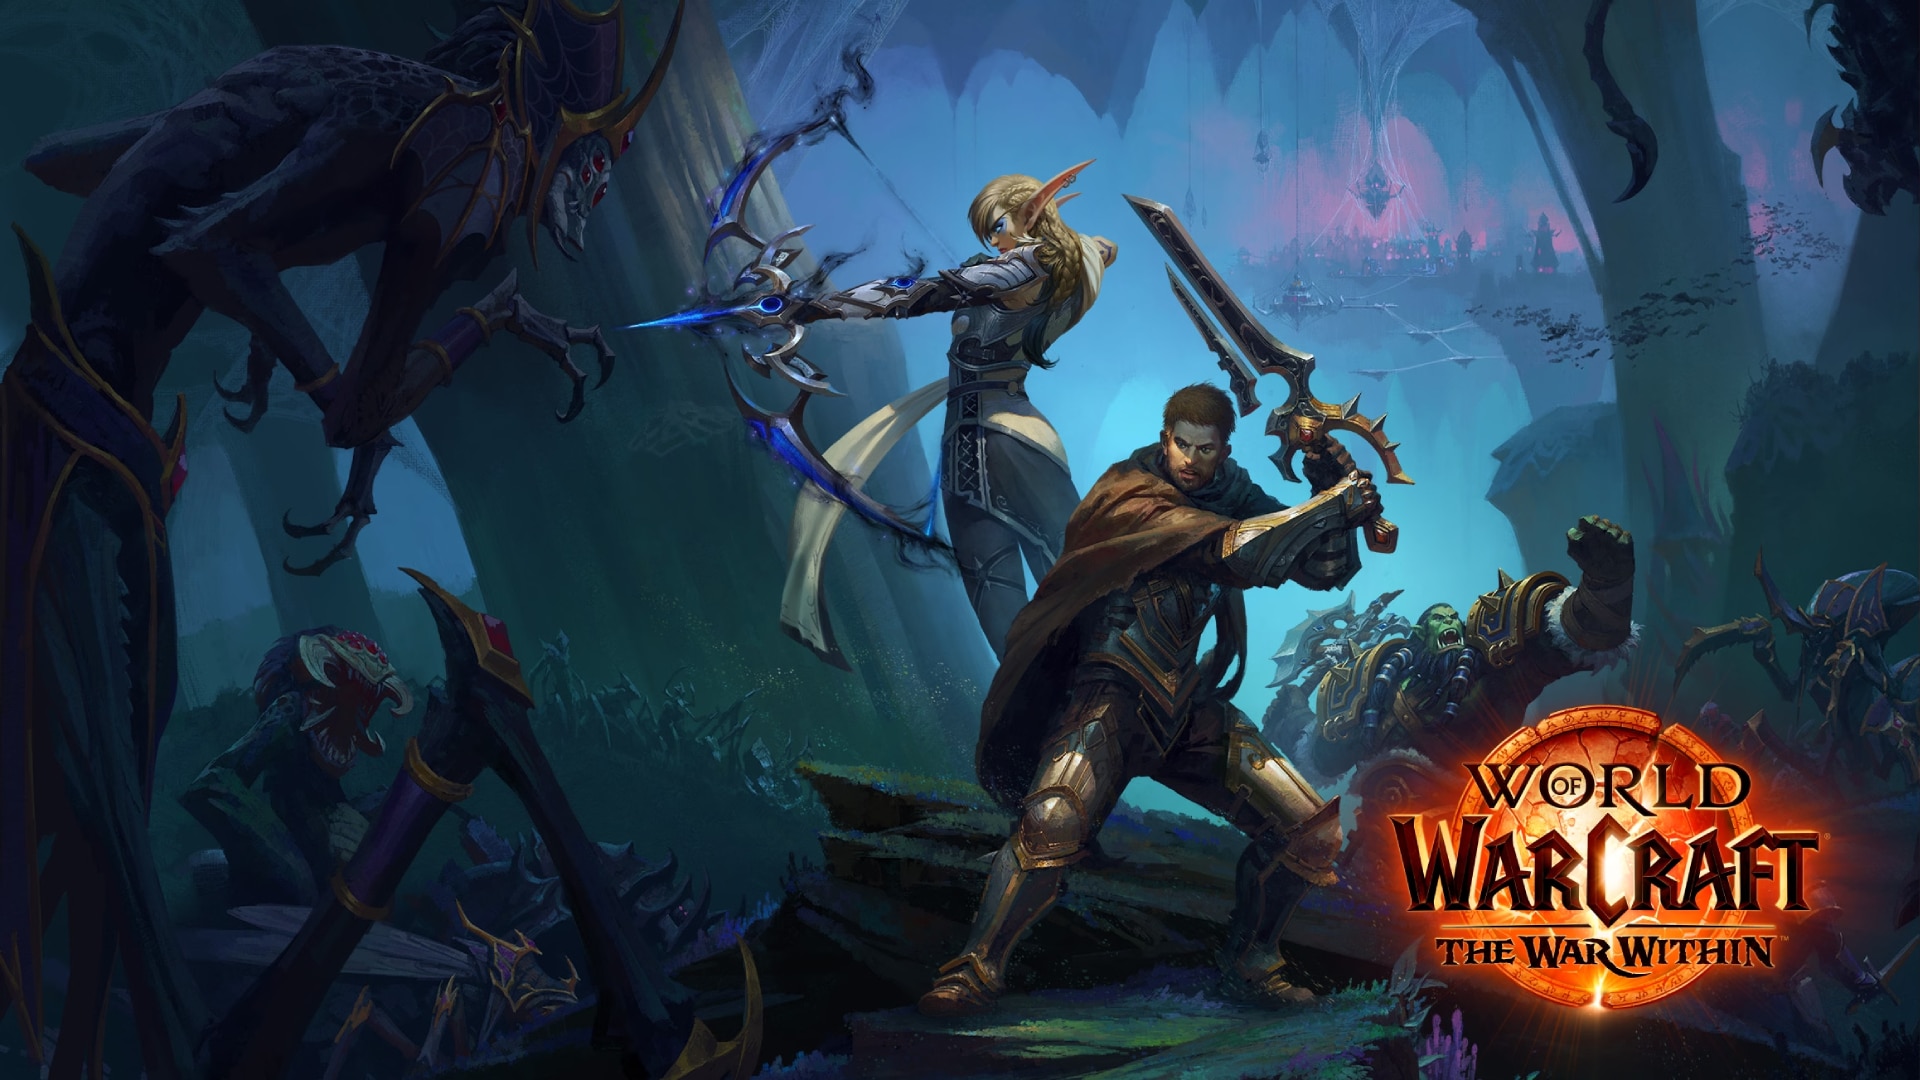 World of Warcraft The War Within Trailer